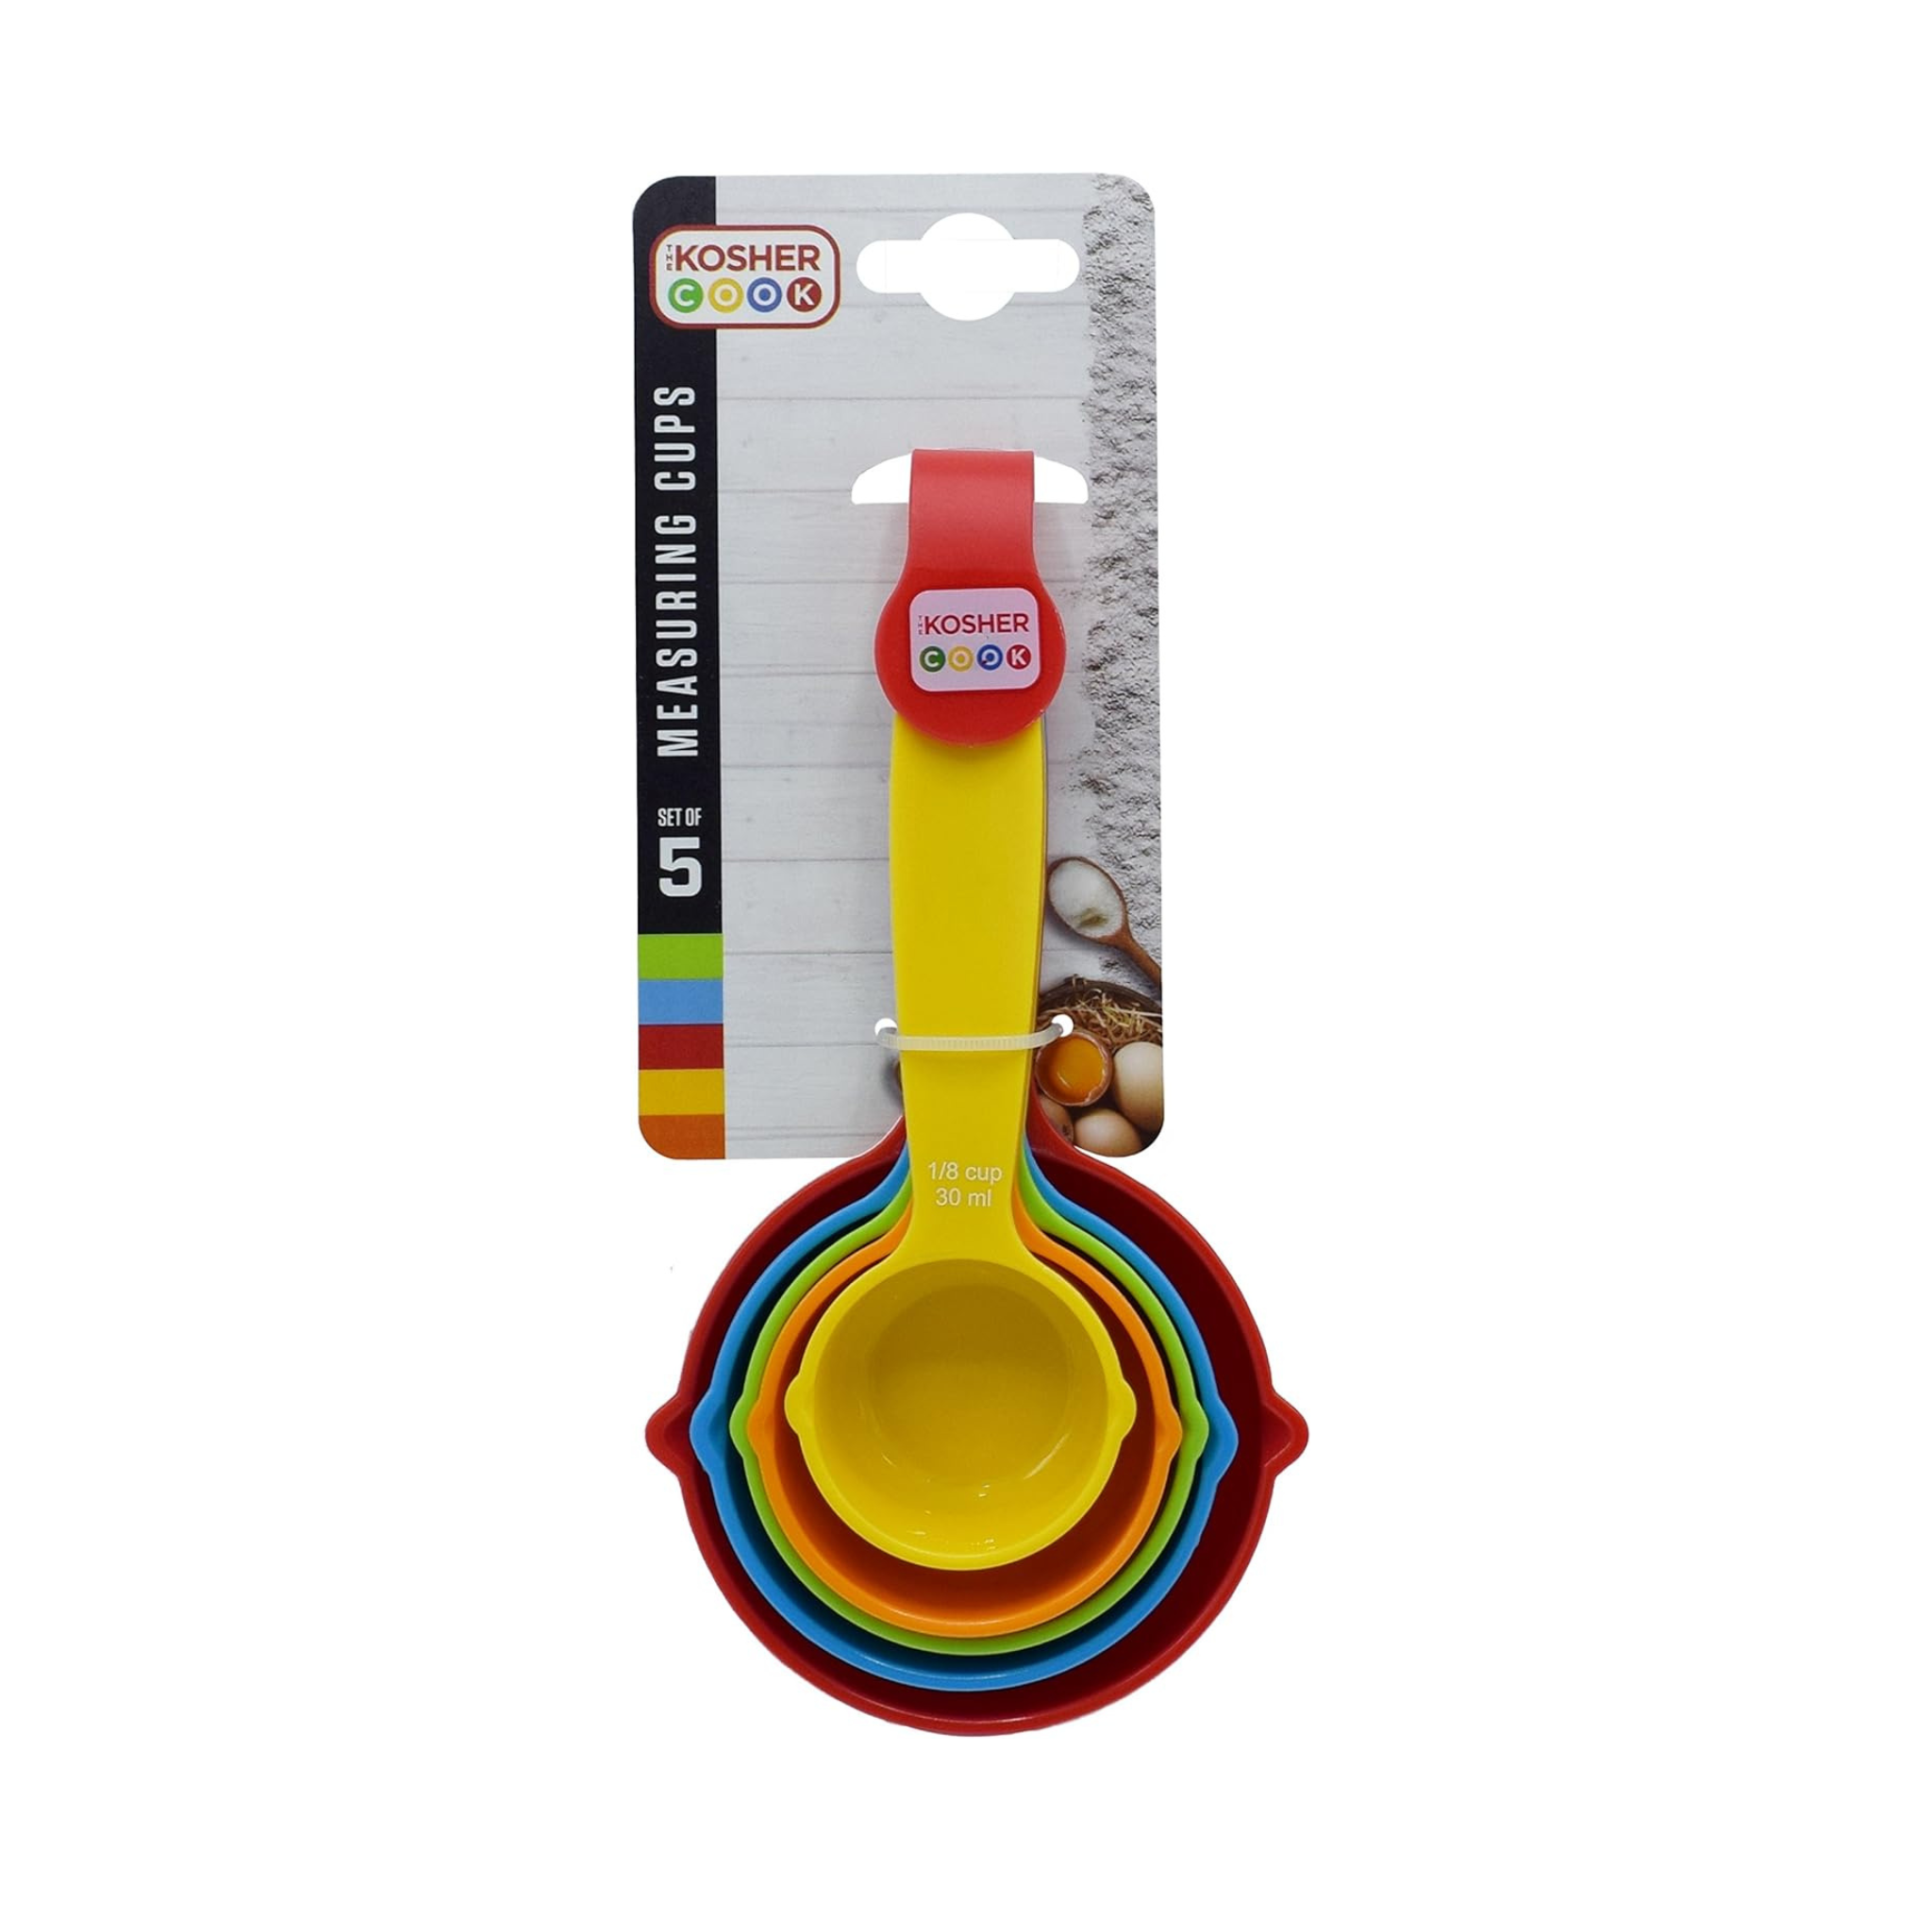 The Kosher Cook Multicolor Measuring Cups